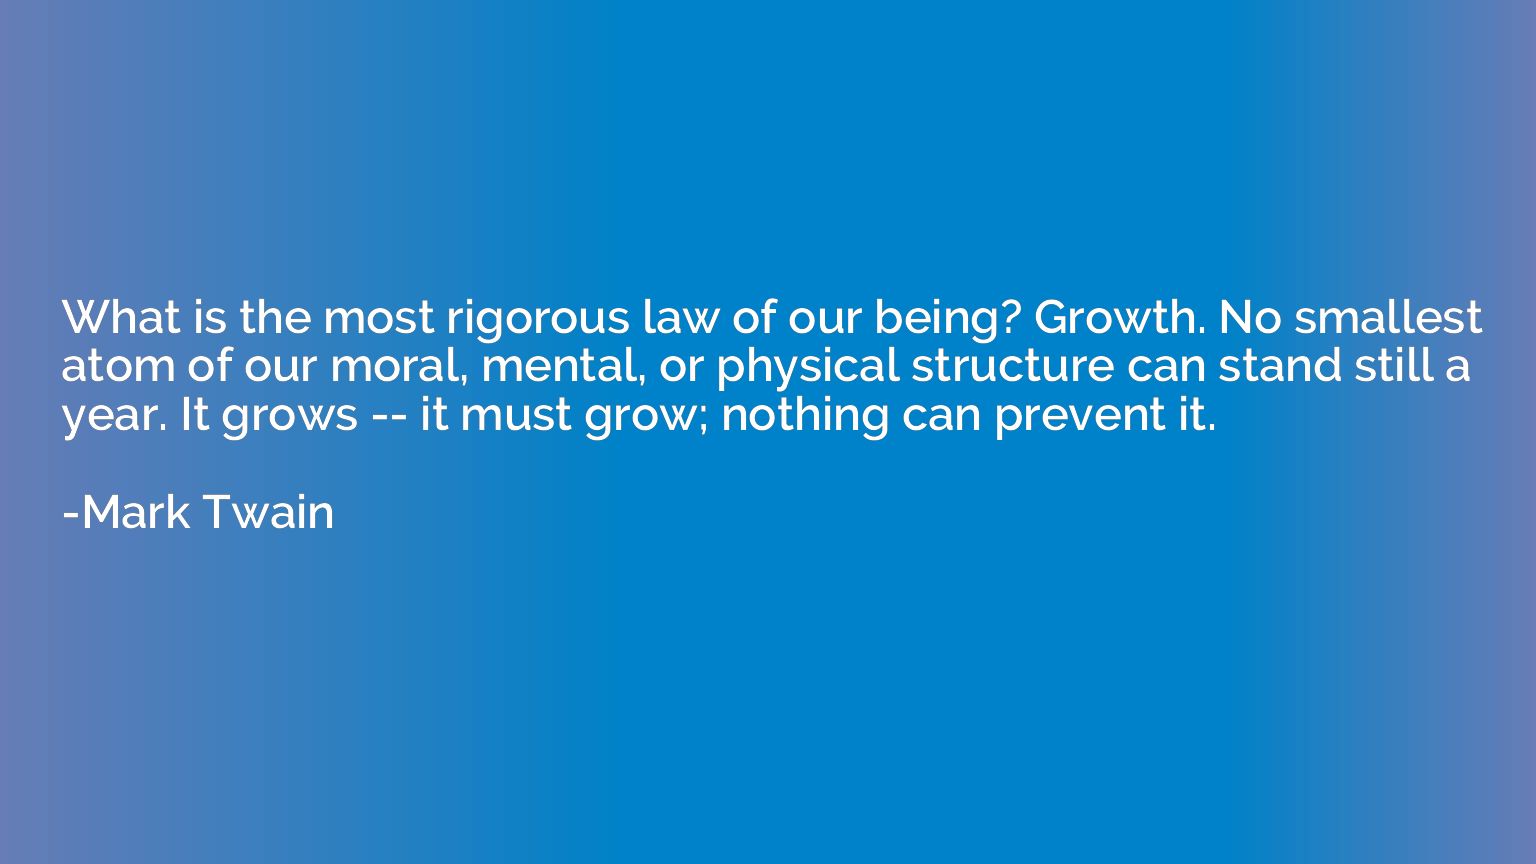 What is the most rigorous law of our being? Growth. No small